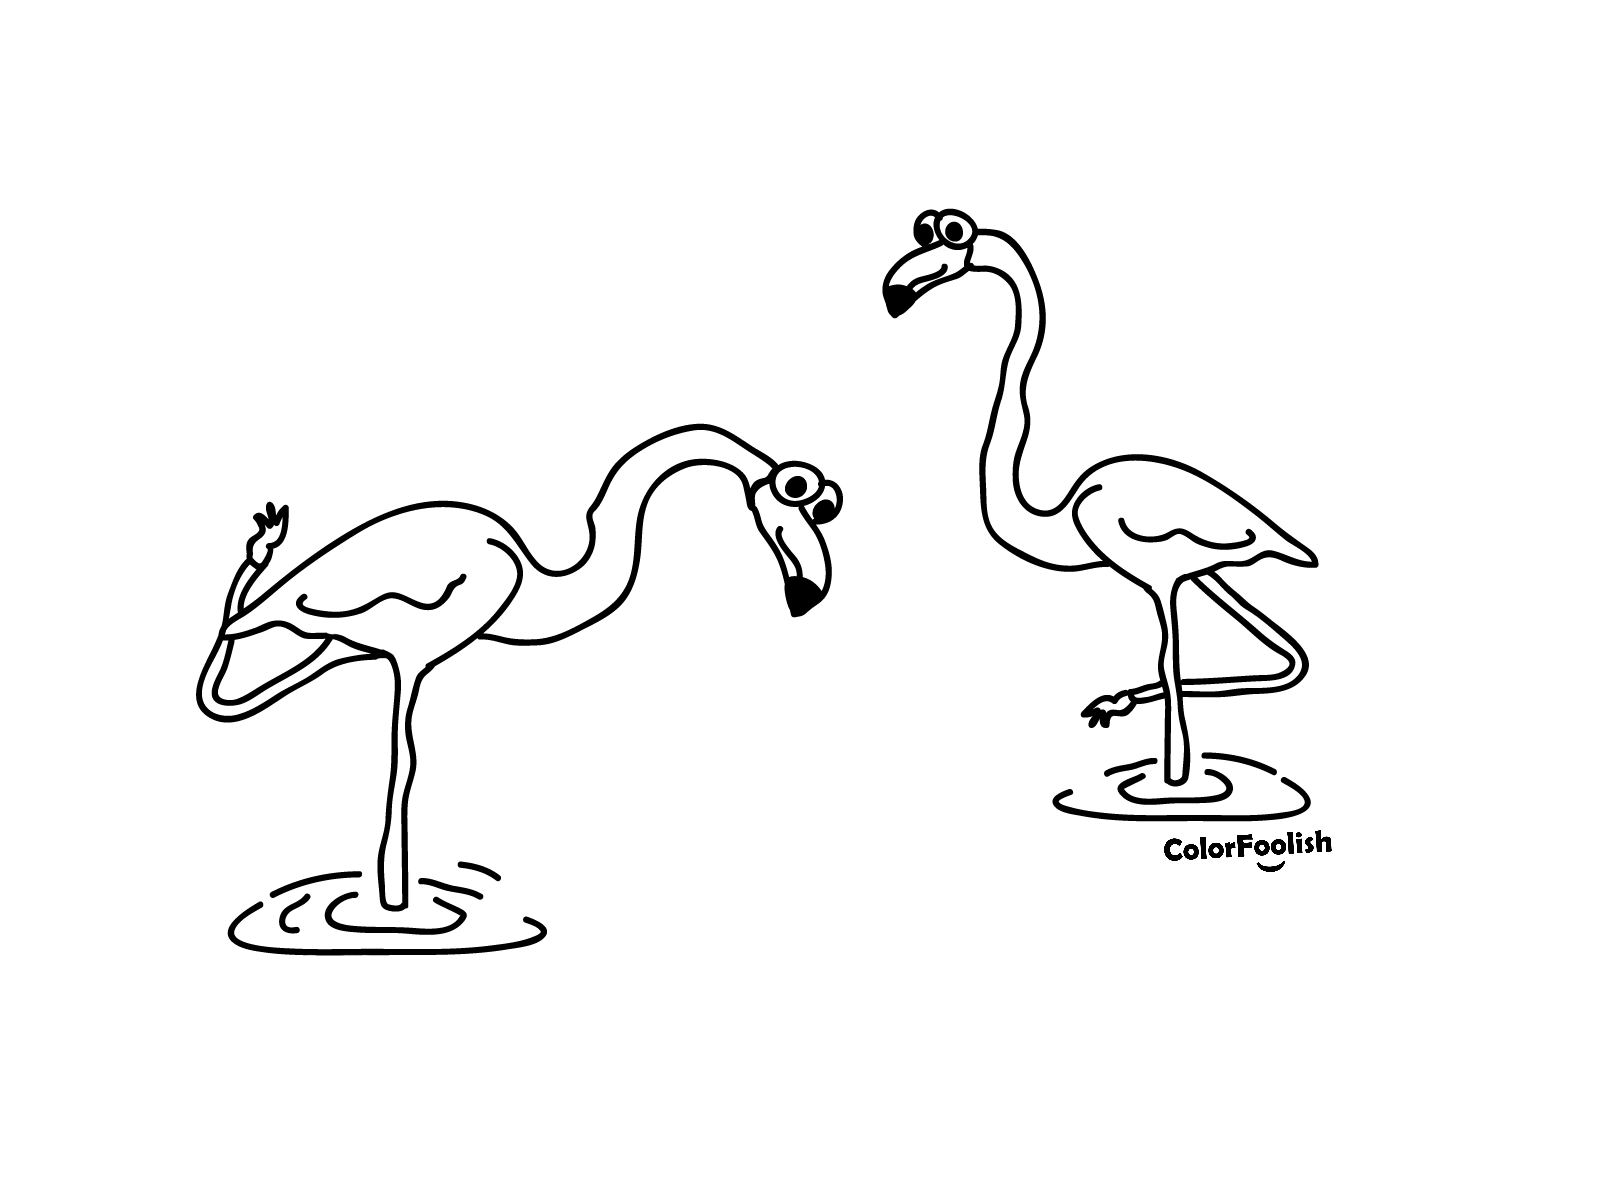 Coloring page of flamingos working out